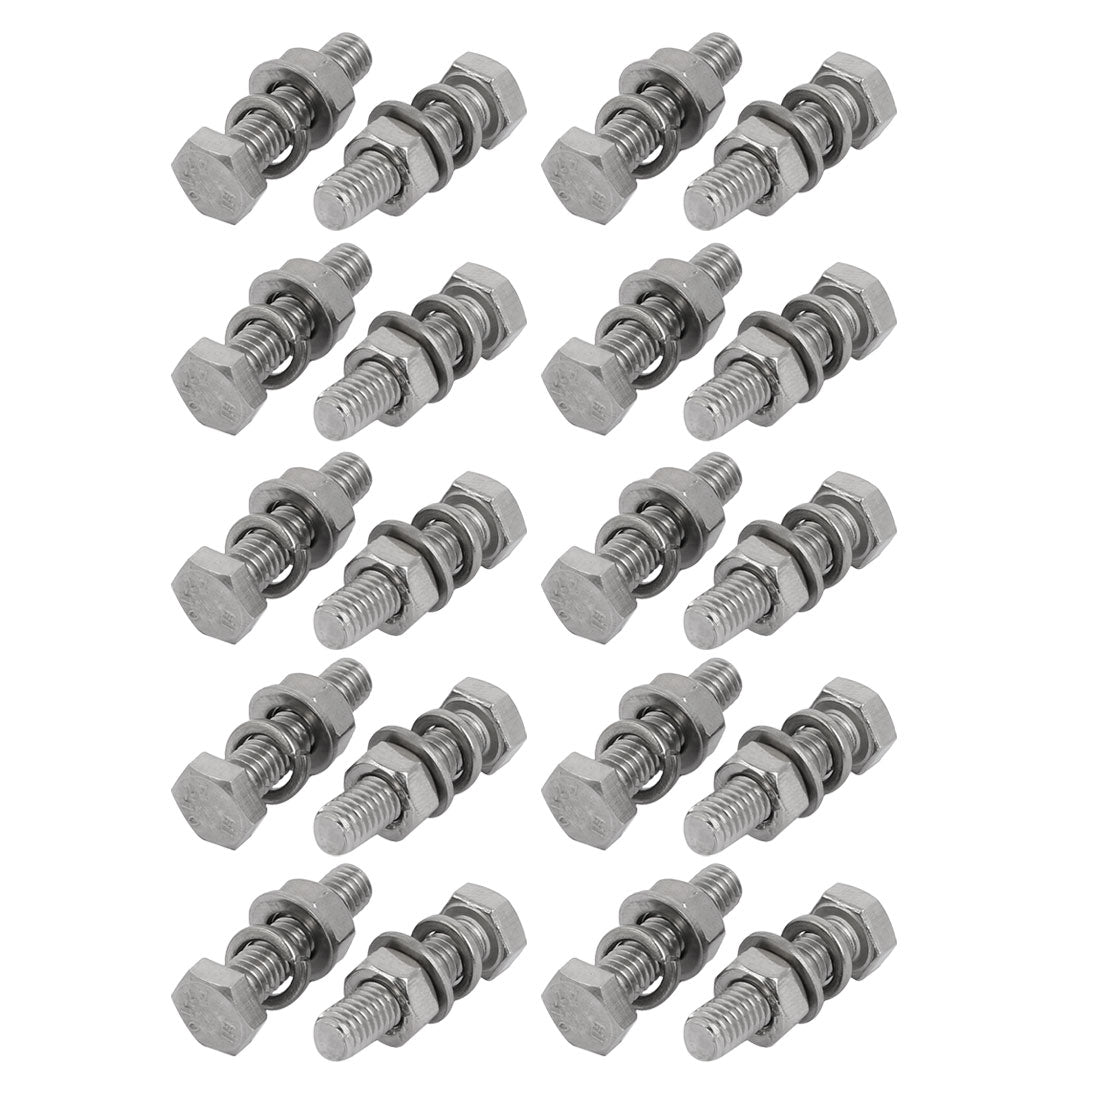 uxcell Uxcell 20pcs 304 Stainless Steel M6x25mm Hex Bolts w Nuts and Washers Assortment Kit